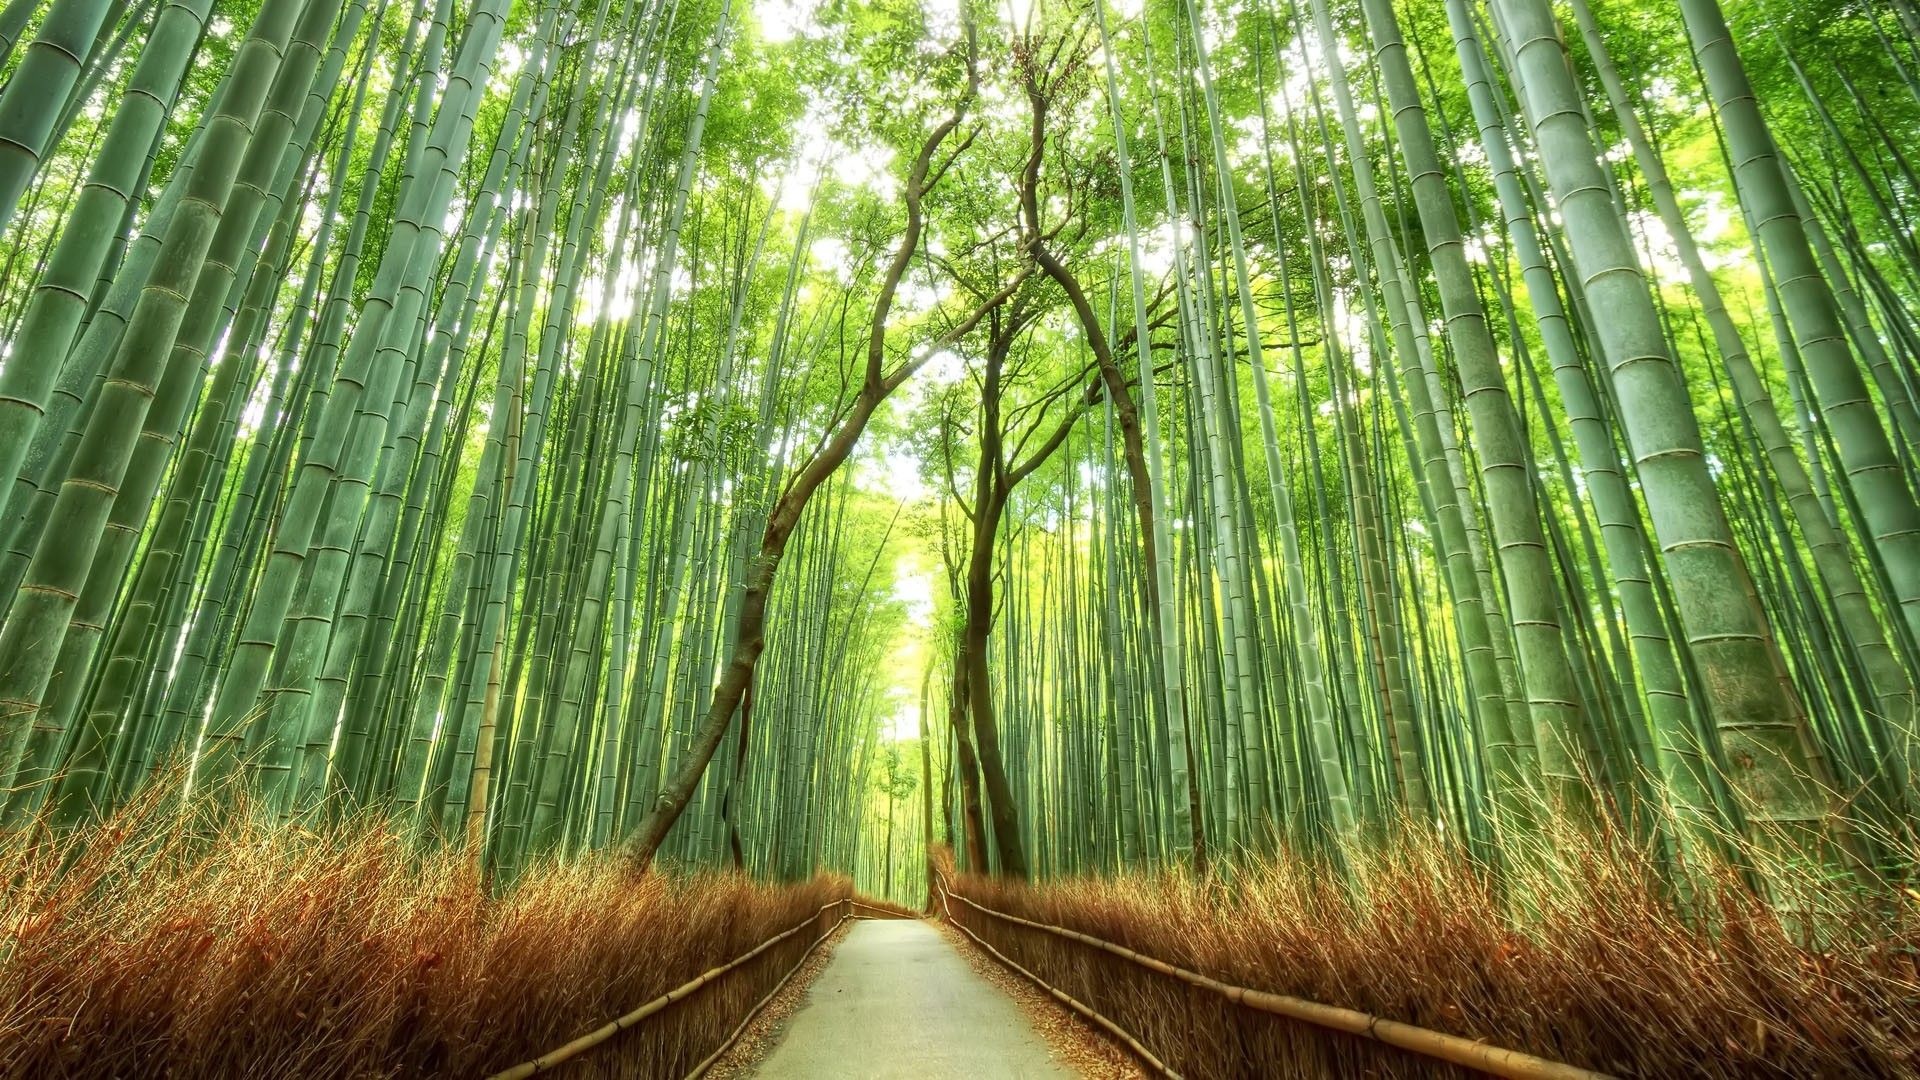 Bamboo forest wallpapers, Nature's sanctuary, Peaceful escape, Serene greenery, 1920x1080 Full HD Desktop